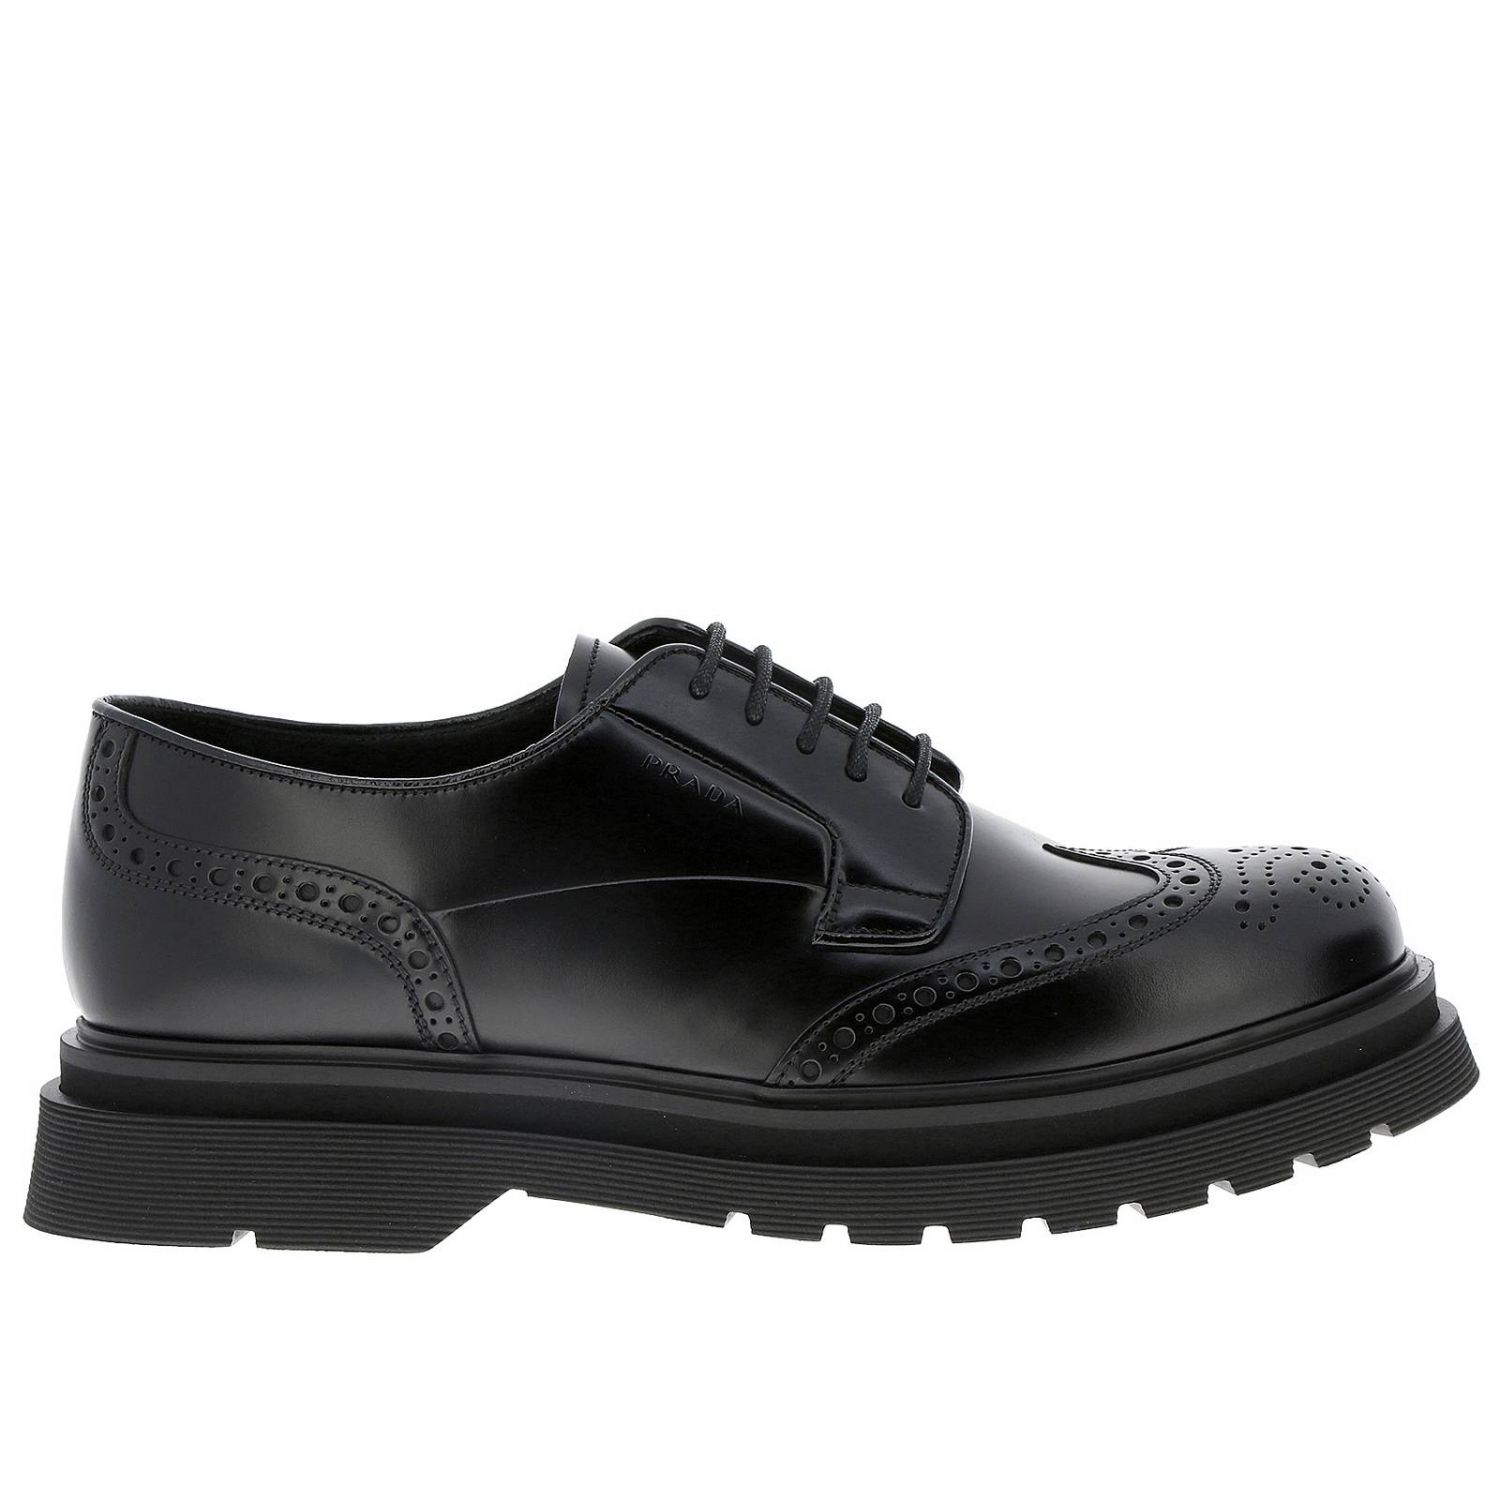 Brogue shoes Prada: Prada derby shoes in brushed leather black 1